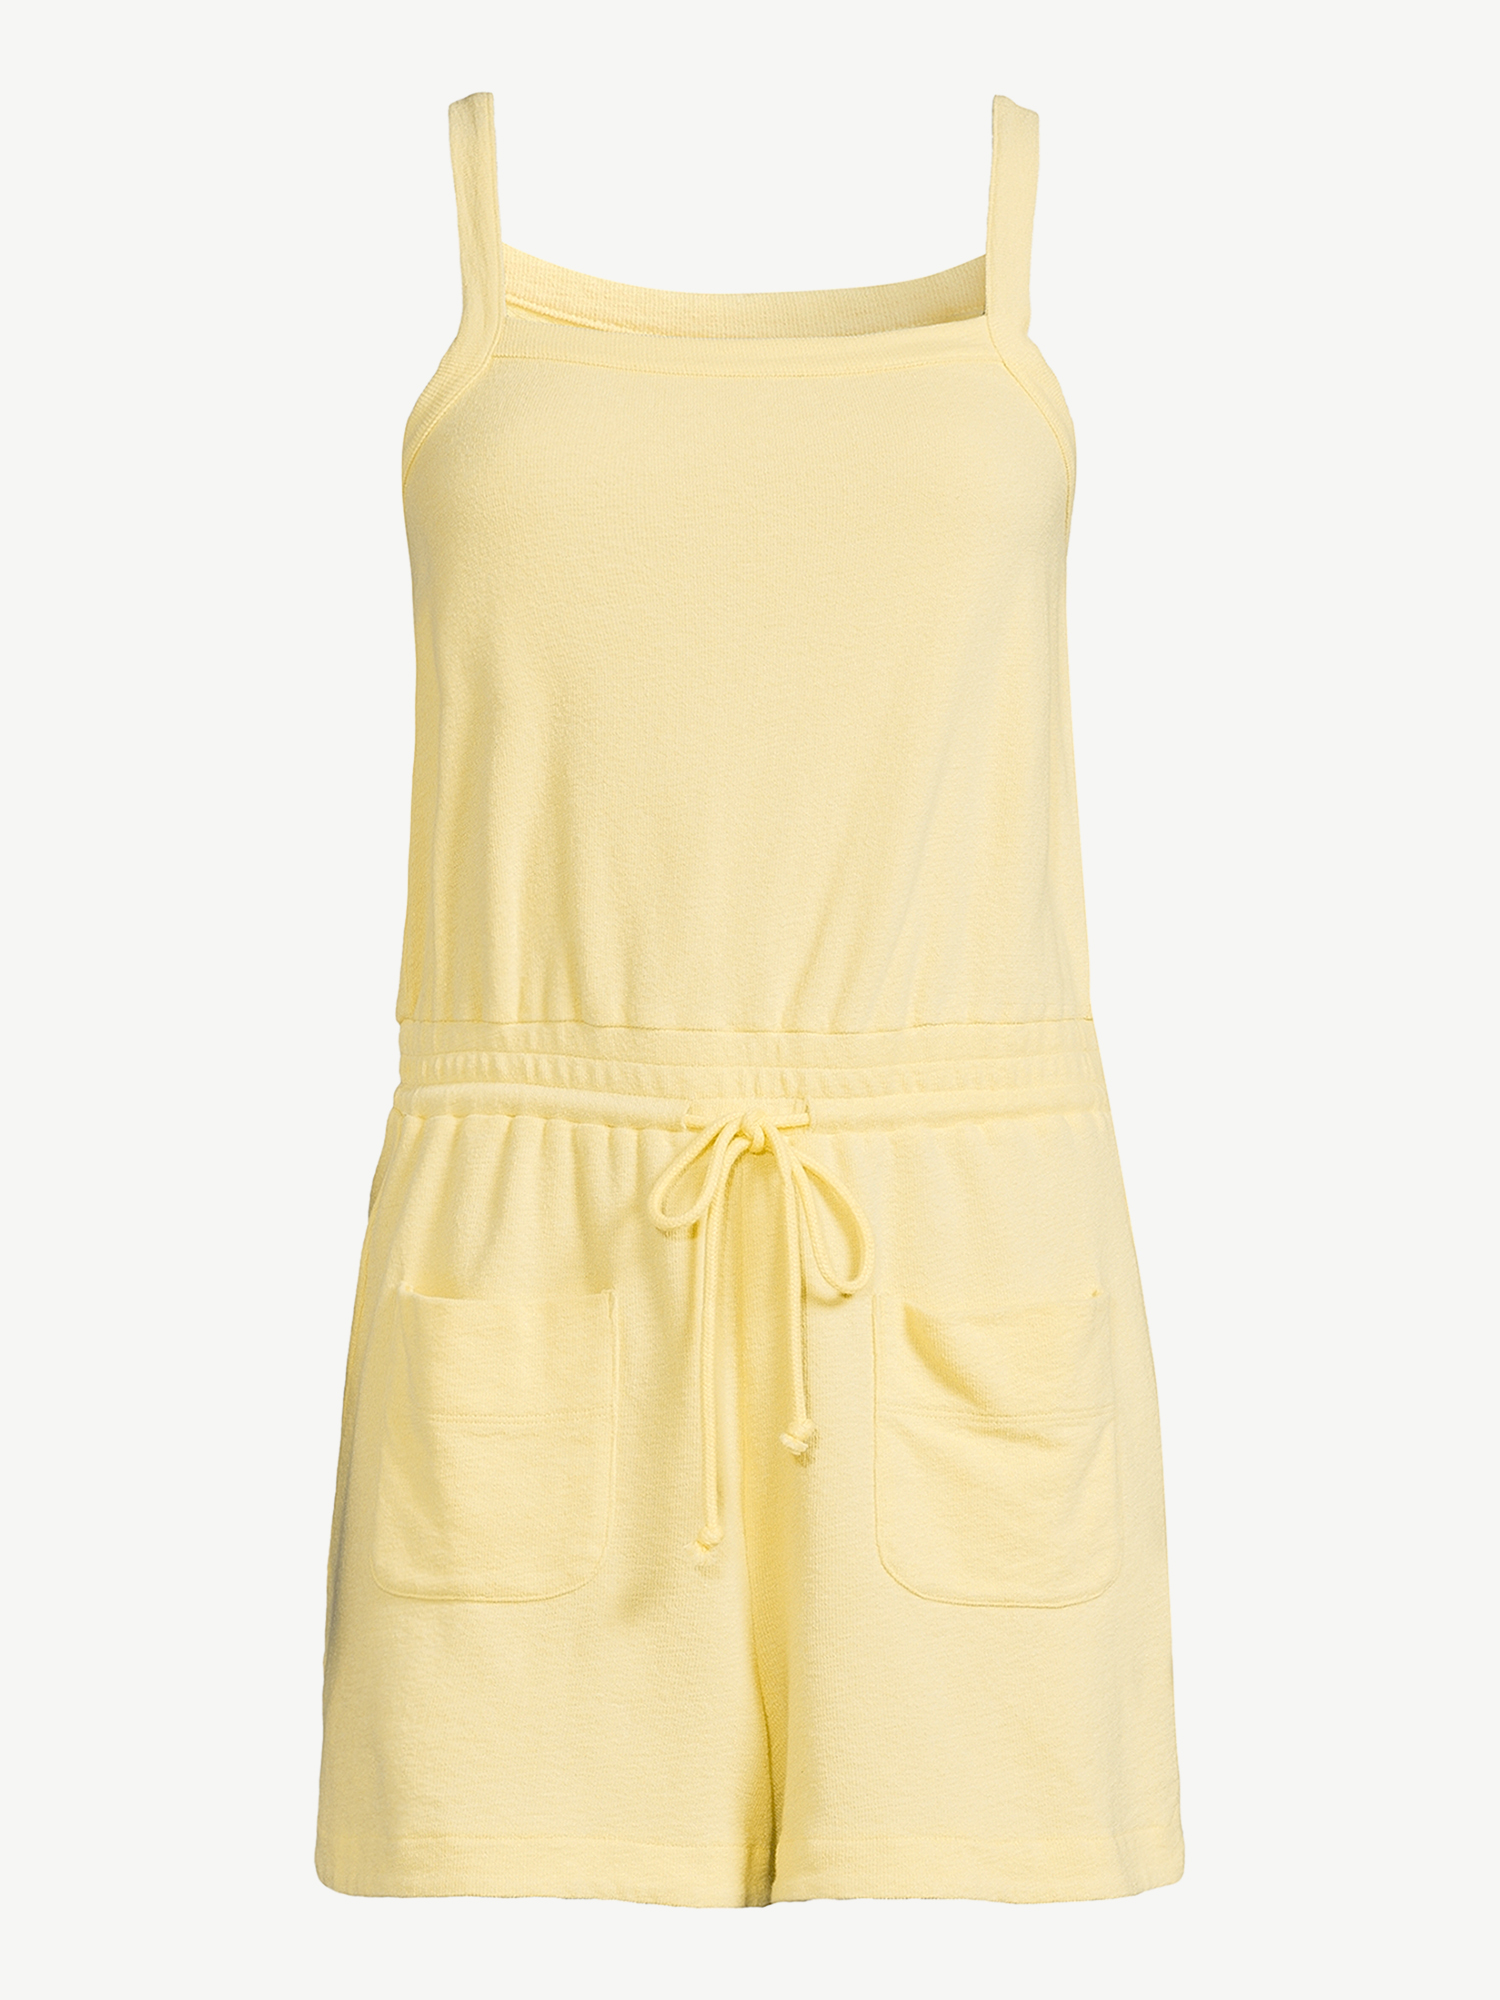 Free Assembly Women's Sleeveless Cotton Romper - image 3 of 5